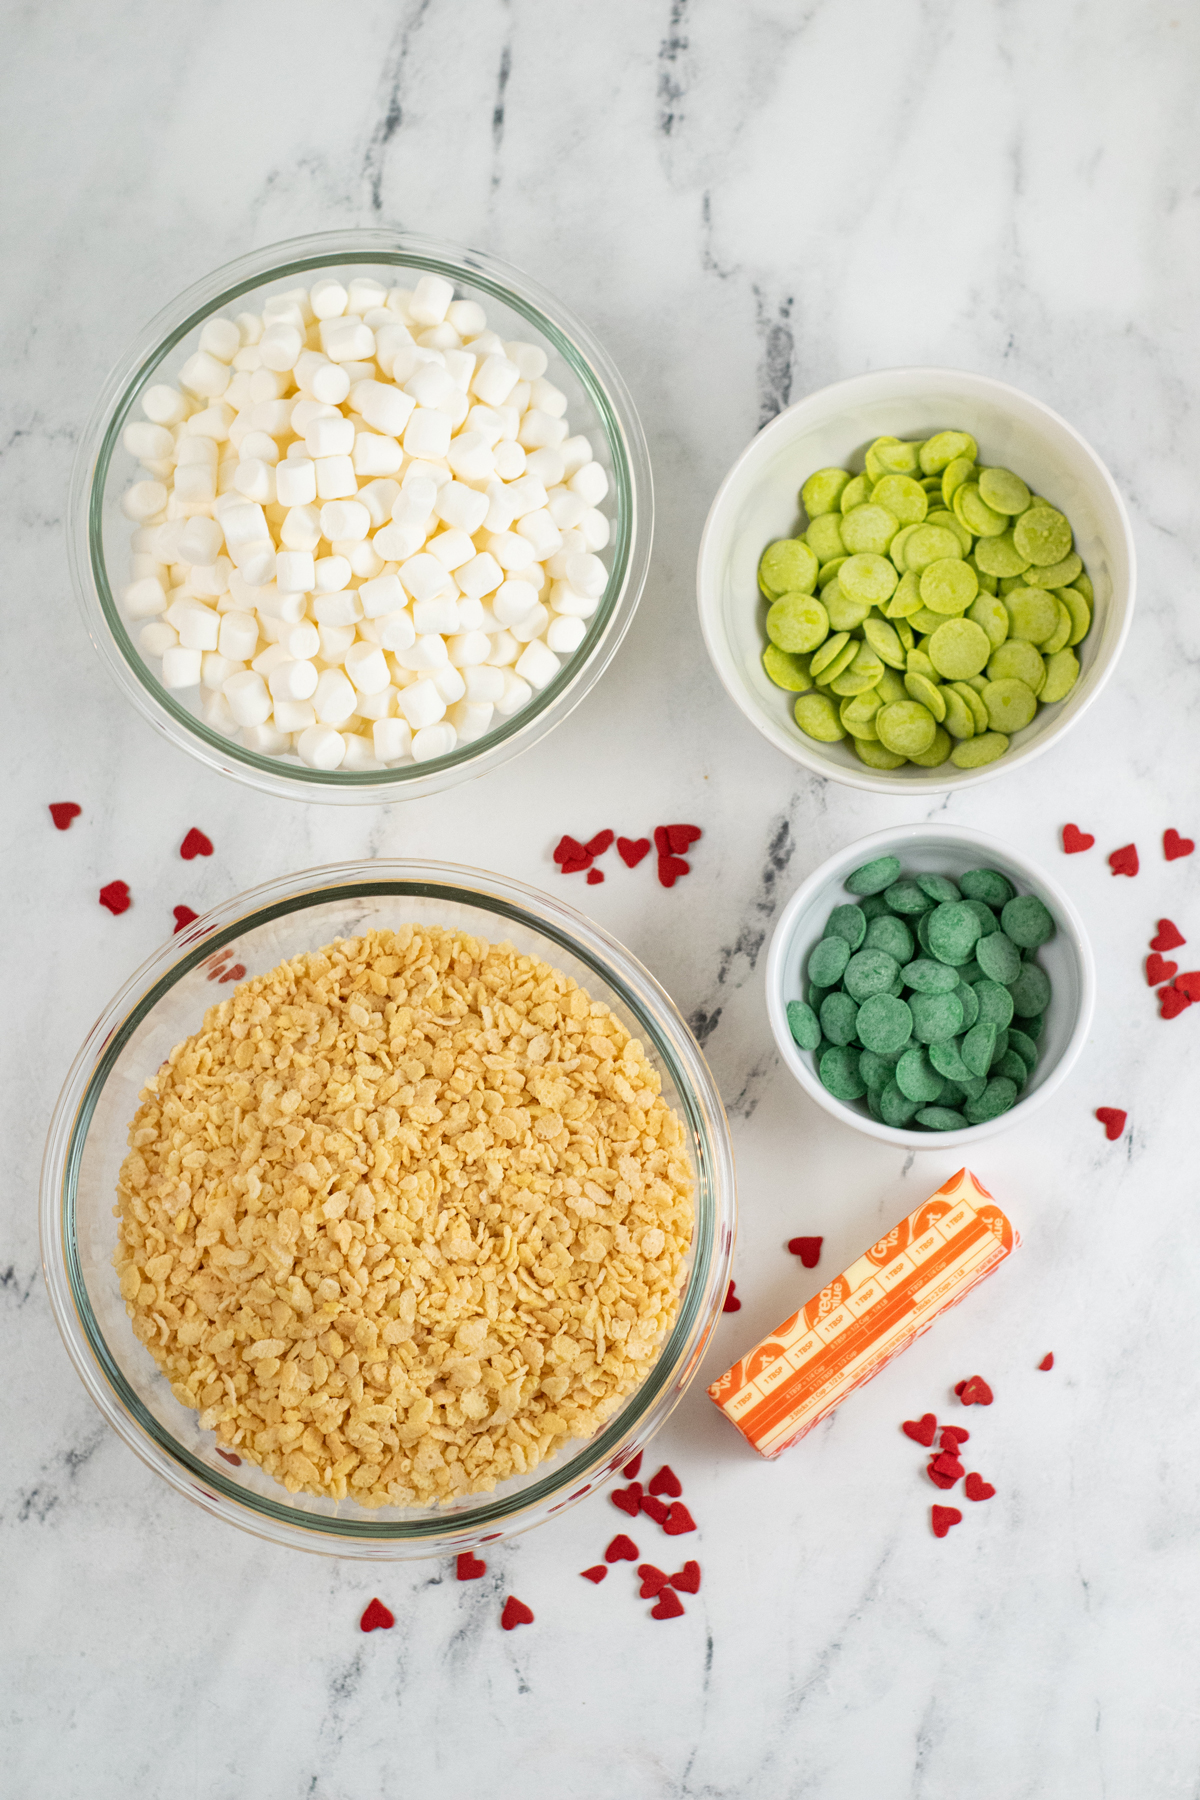 Ingredients for Grinch Rice Krispie Treats. This includes Rice Krispies Cereal , marshmallows, candy melts and sprinkles